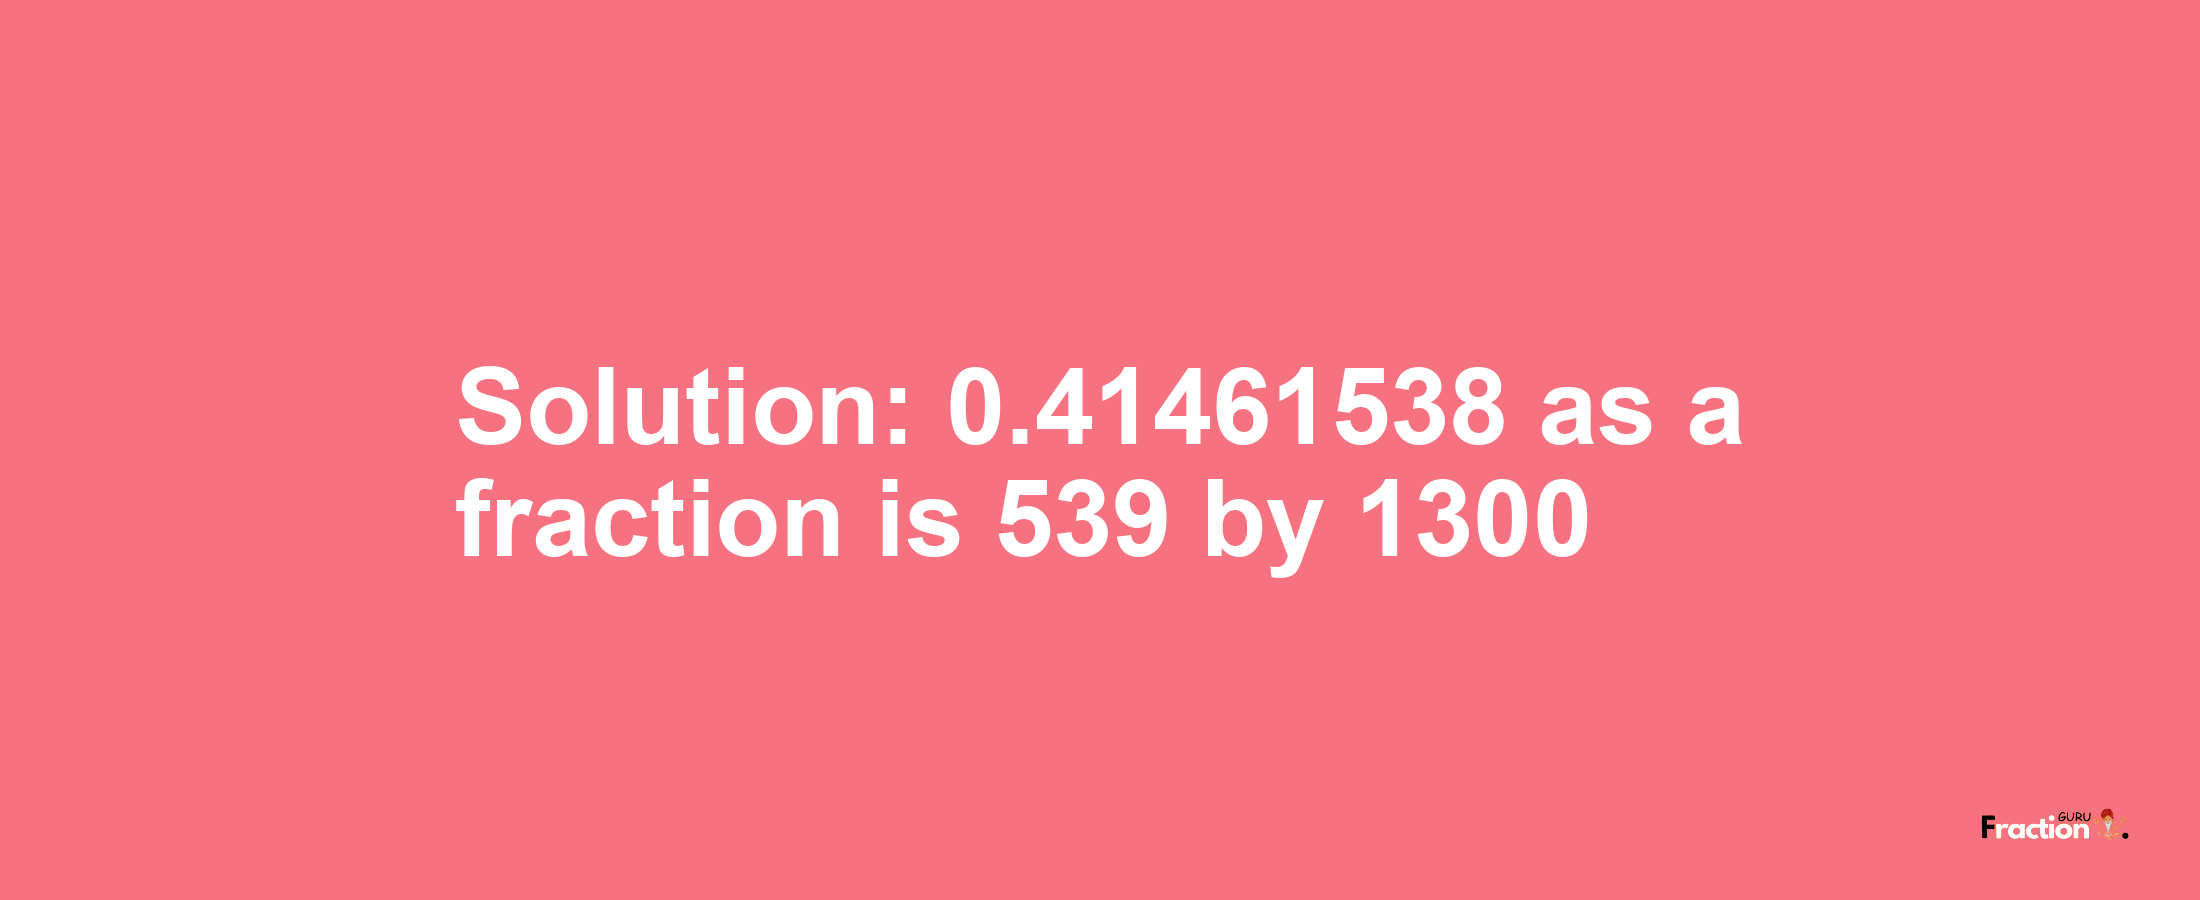 Solution:0.41461538 as a fraction is 539/1300